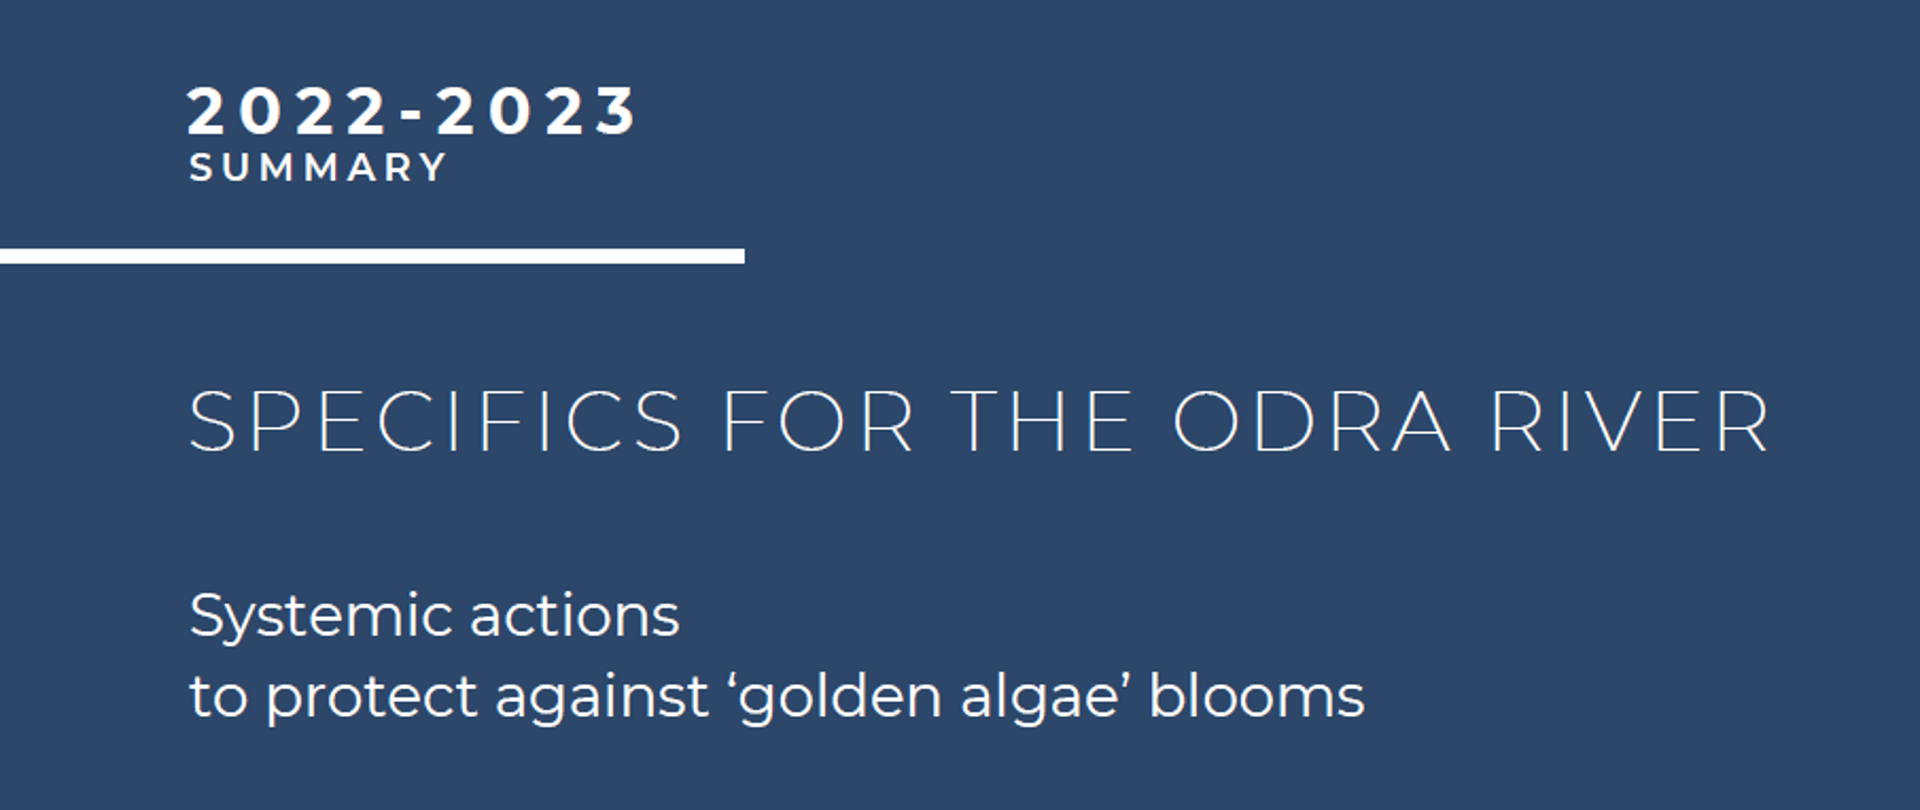 Specifics for the Odra river. Systemic actions to protect against "golden algae" blooms.